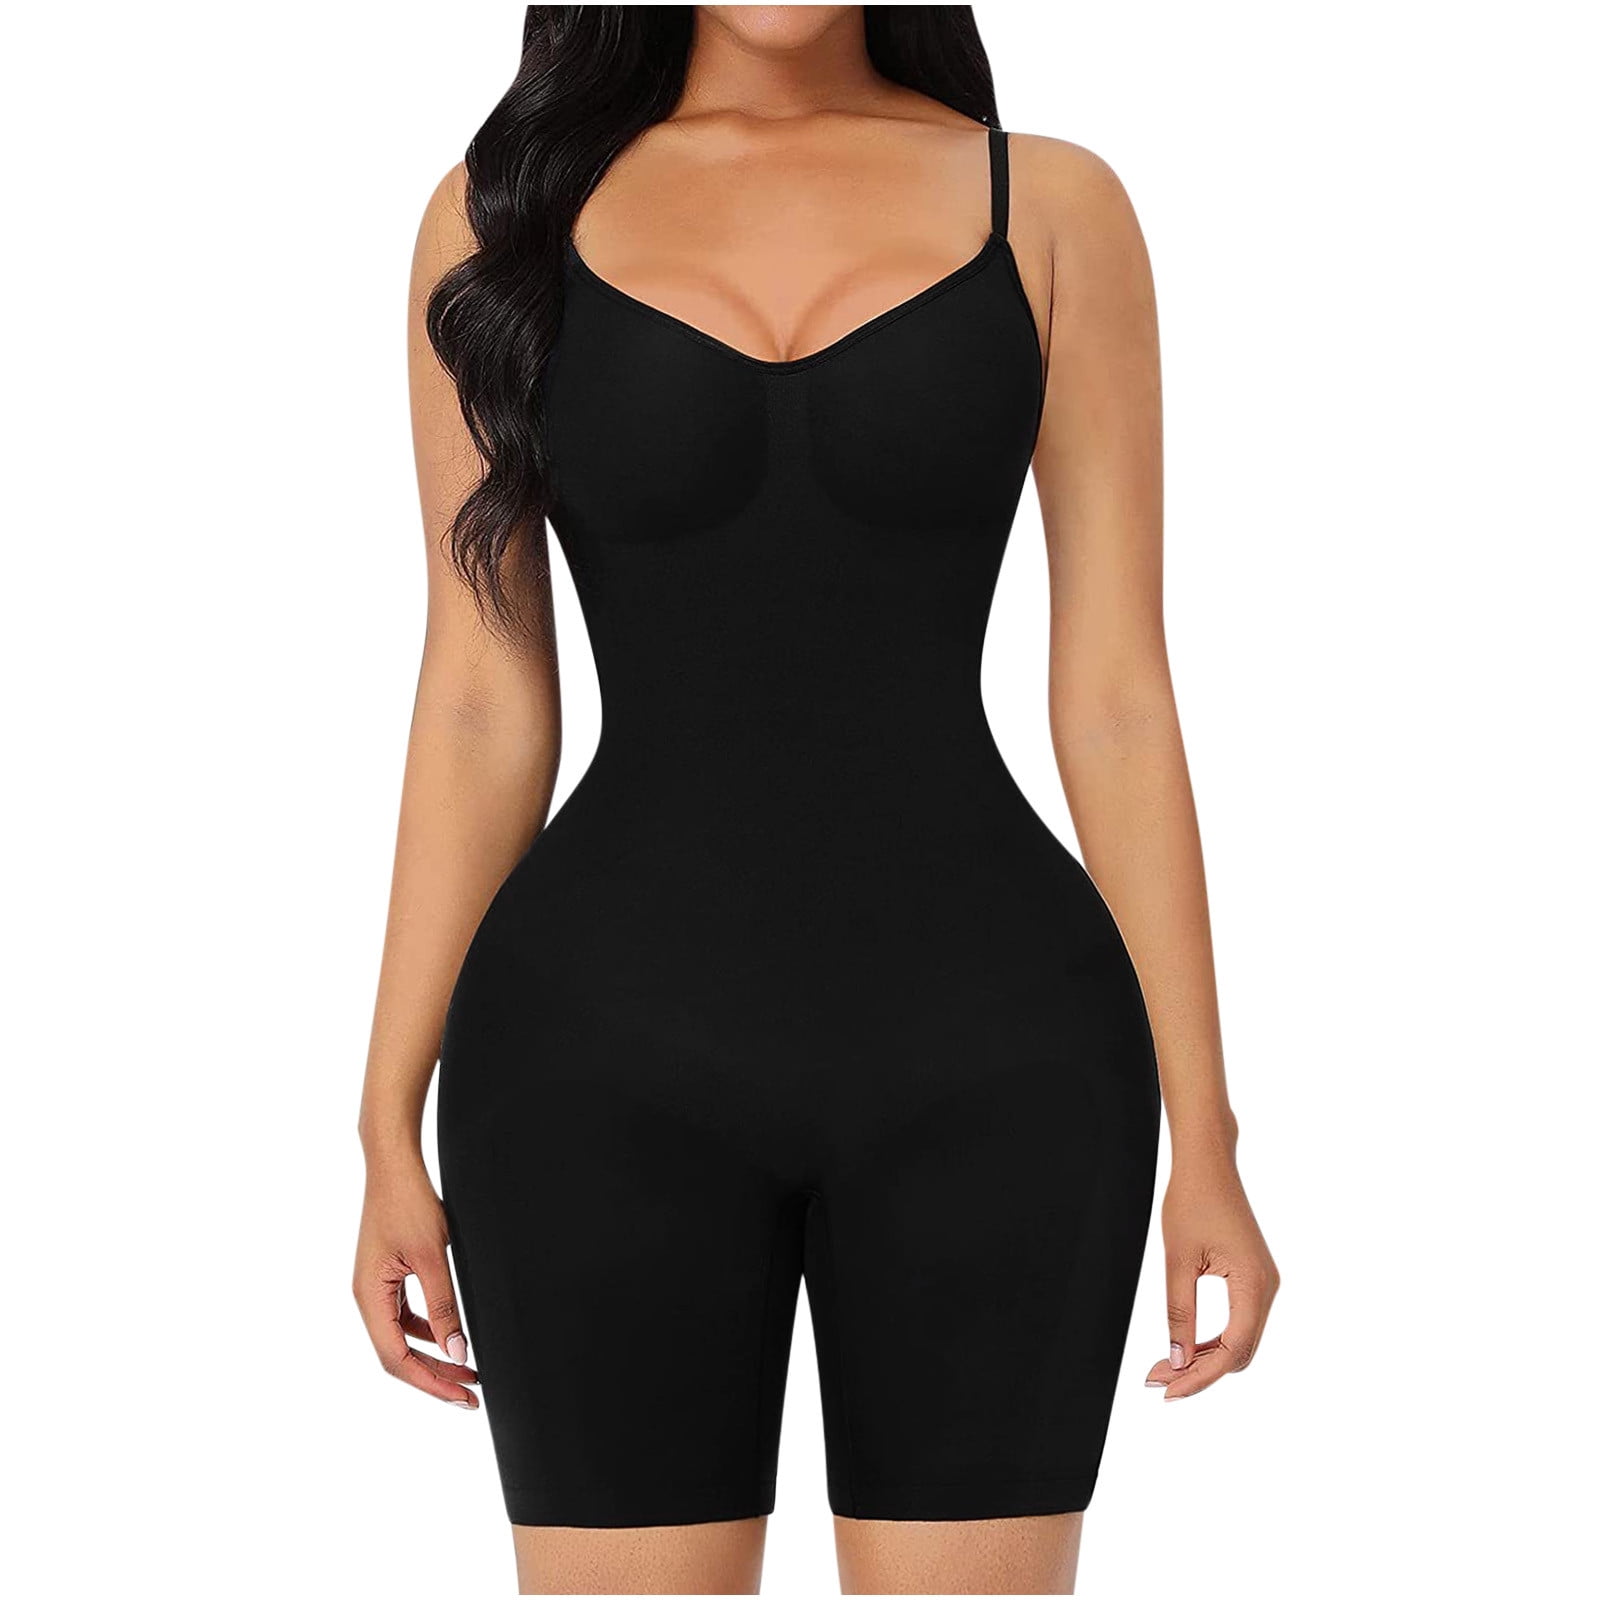 Puntoco Plus size Clearance Ladies One-Piece Body Shaper Abdominal ...